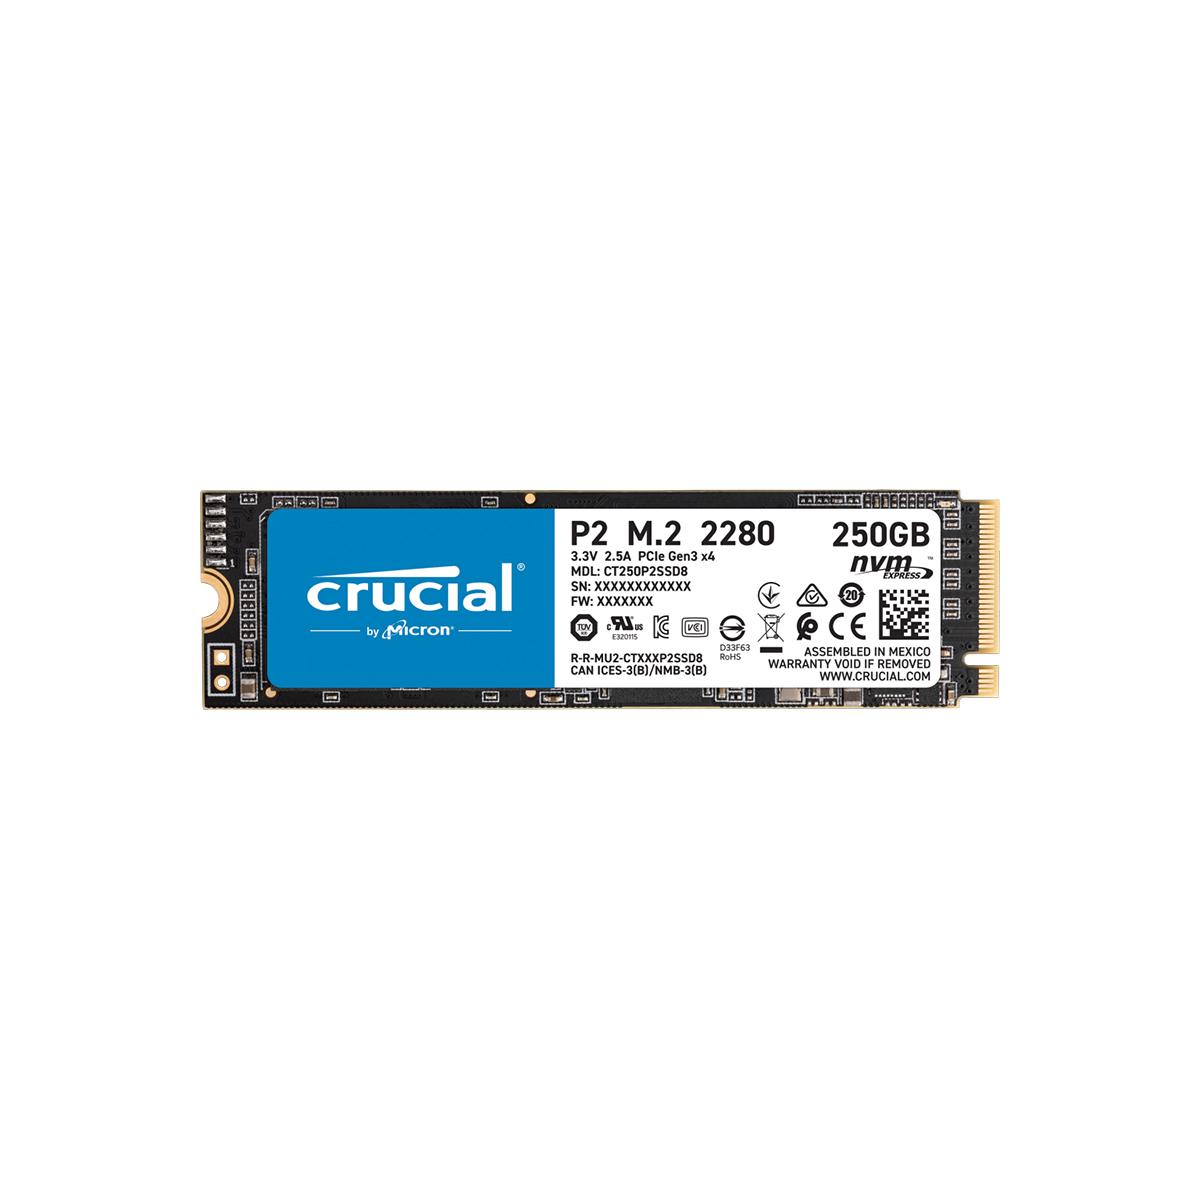 UNIDAD SSD M.2 CRUCIAL 250GB (CT250P2SSD8) P2, PCIE 3.0, NVME, 3D NAND, 2280 - CRUCIAL